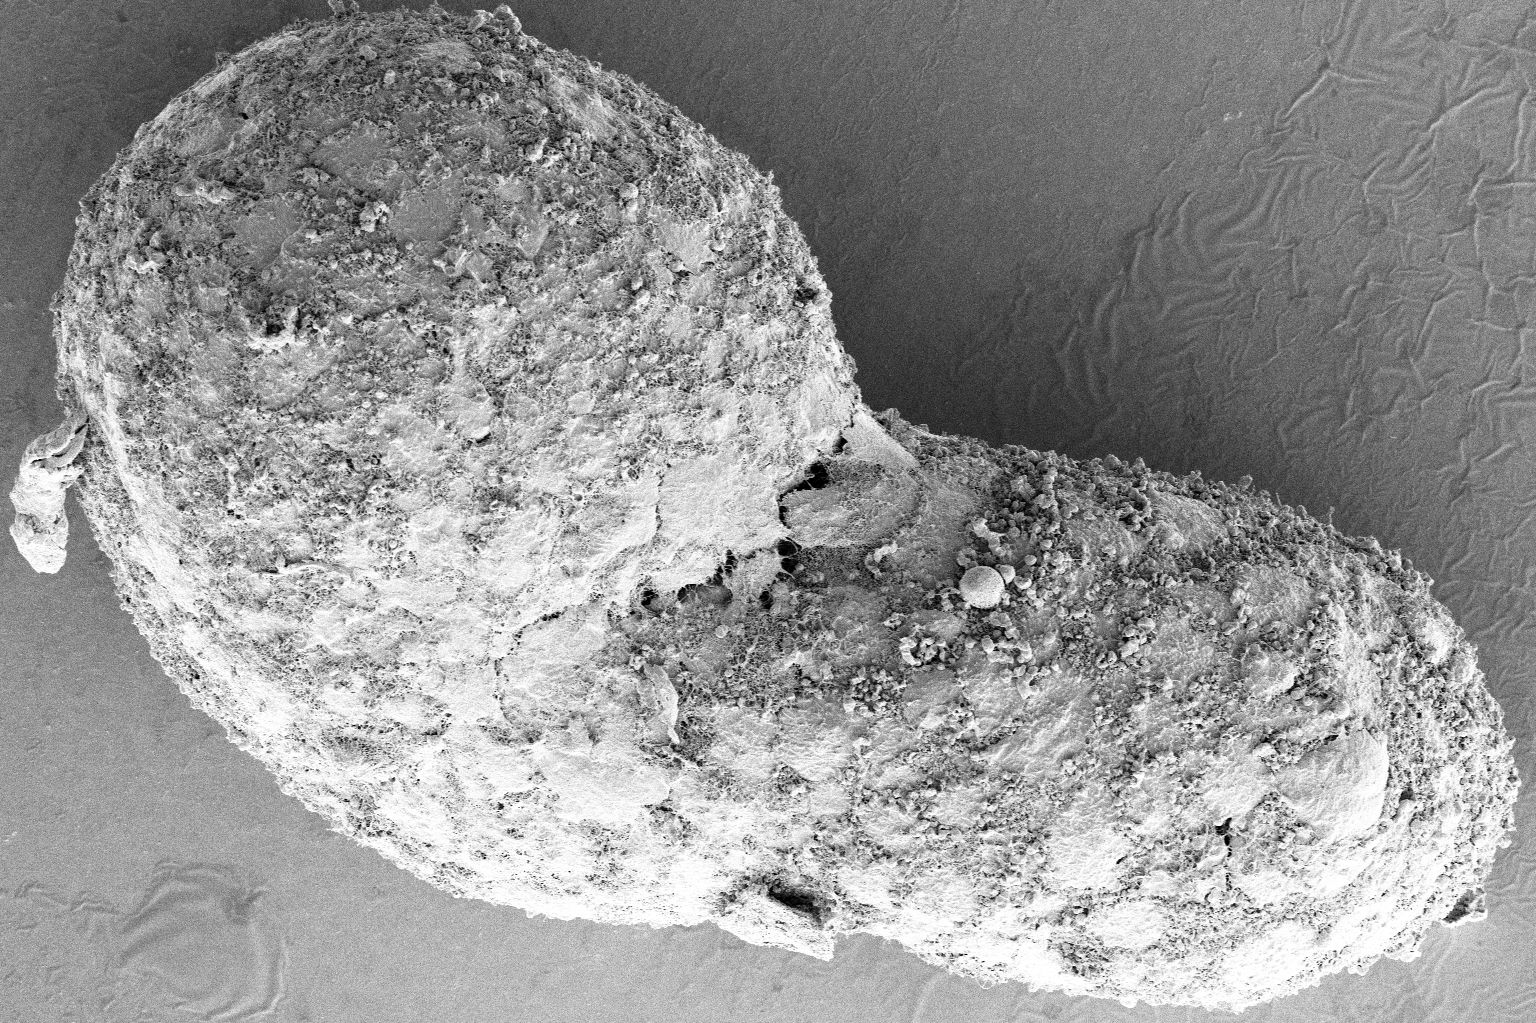 72 hour human gastruloid by Scanning Electron Microscopy